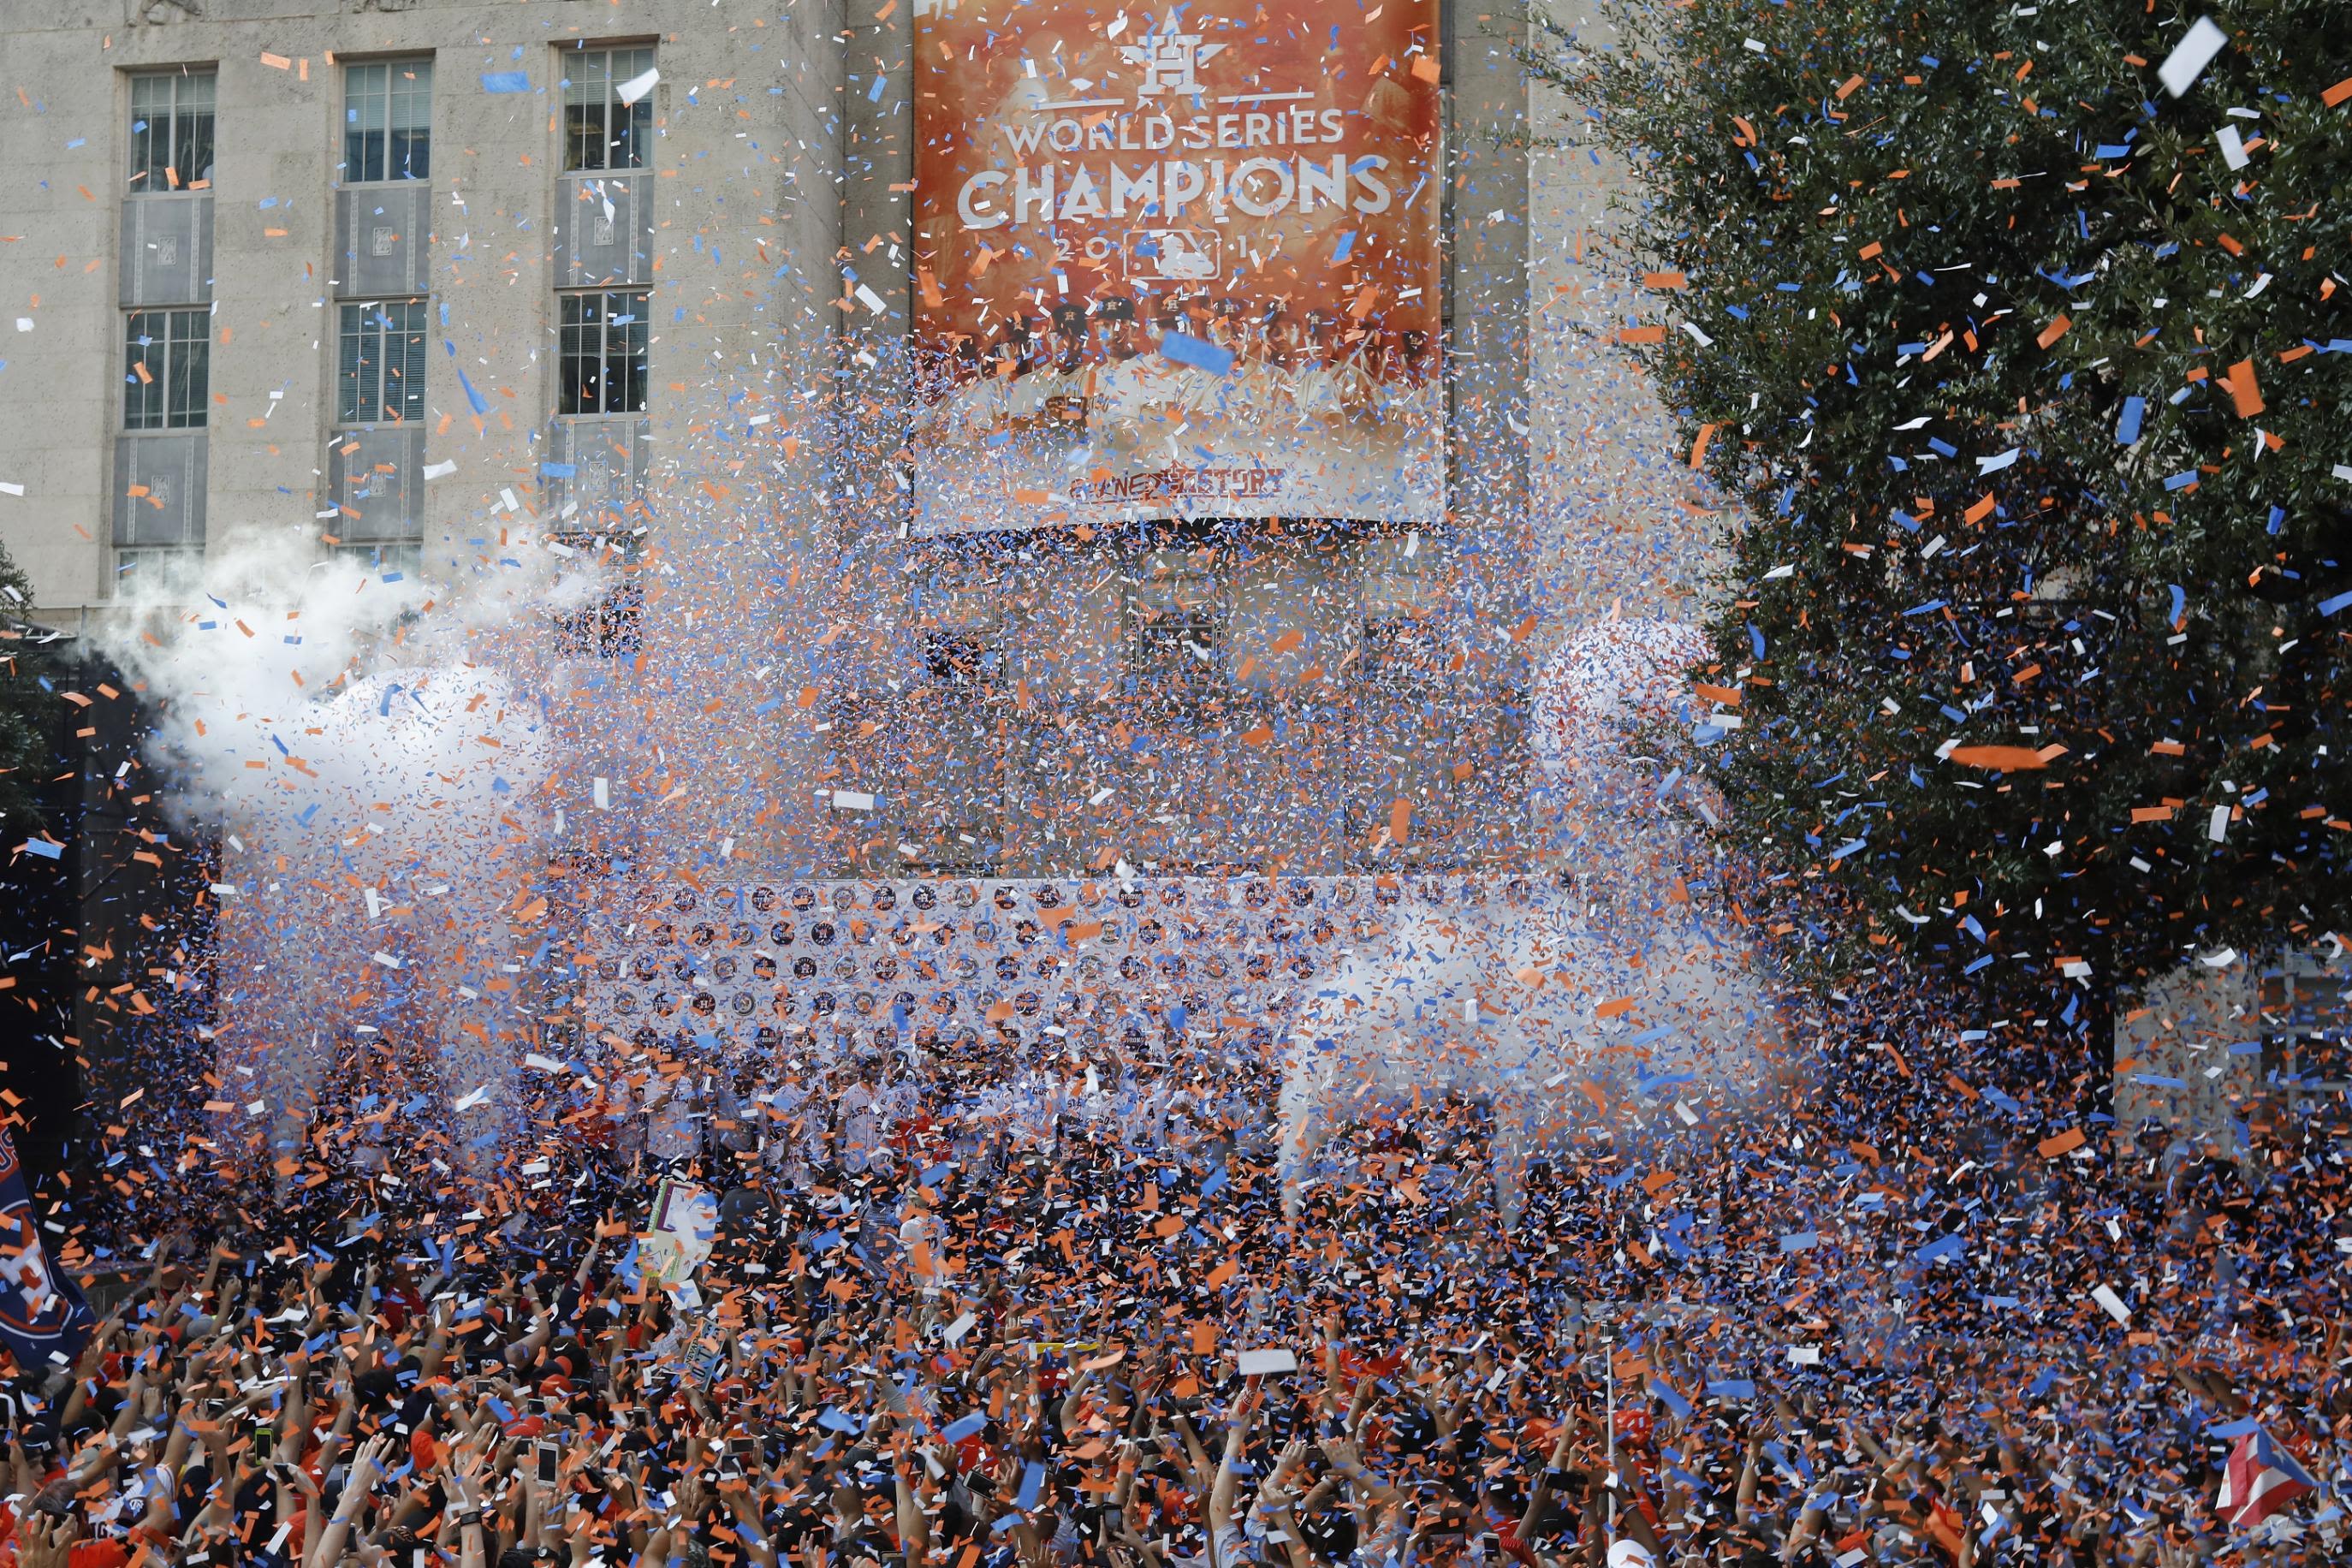 Houston Astros World Series Victory Parade to be held Nov. 7